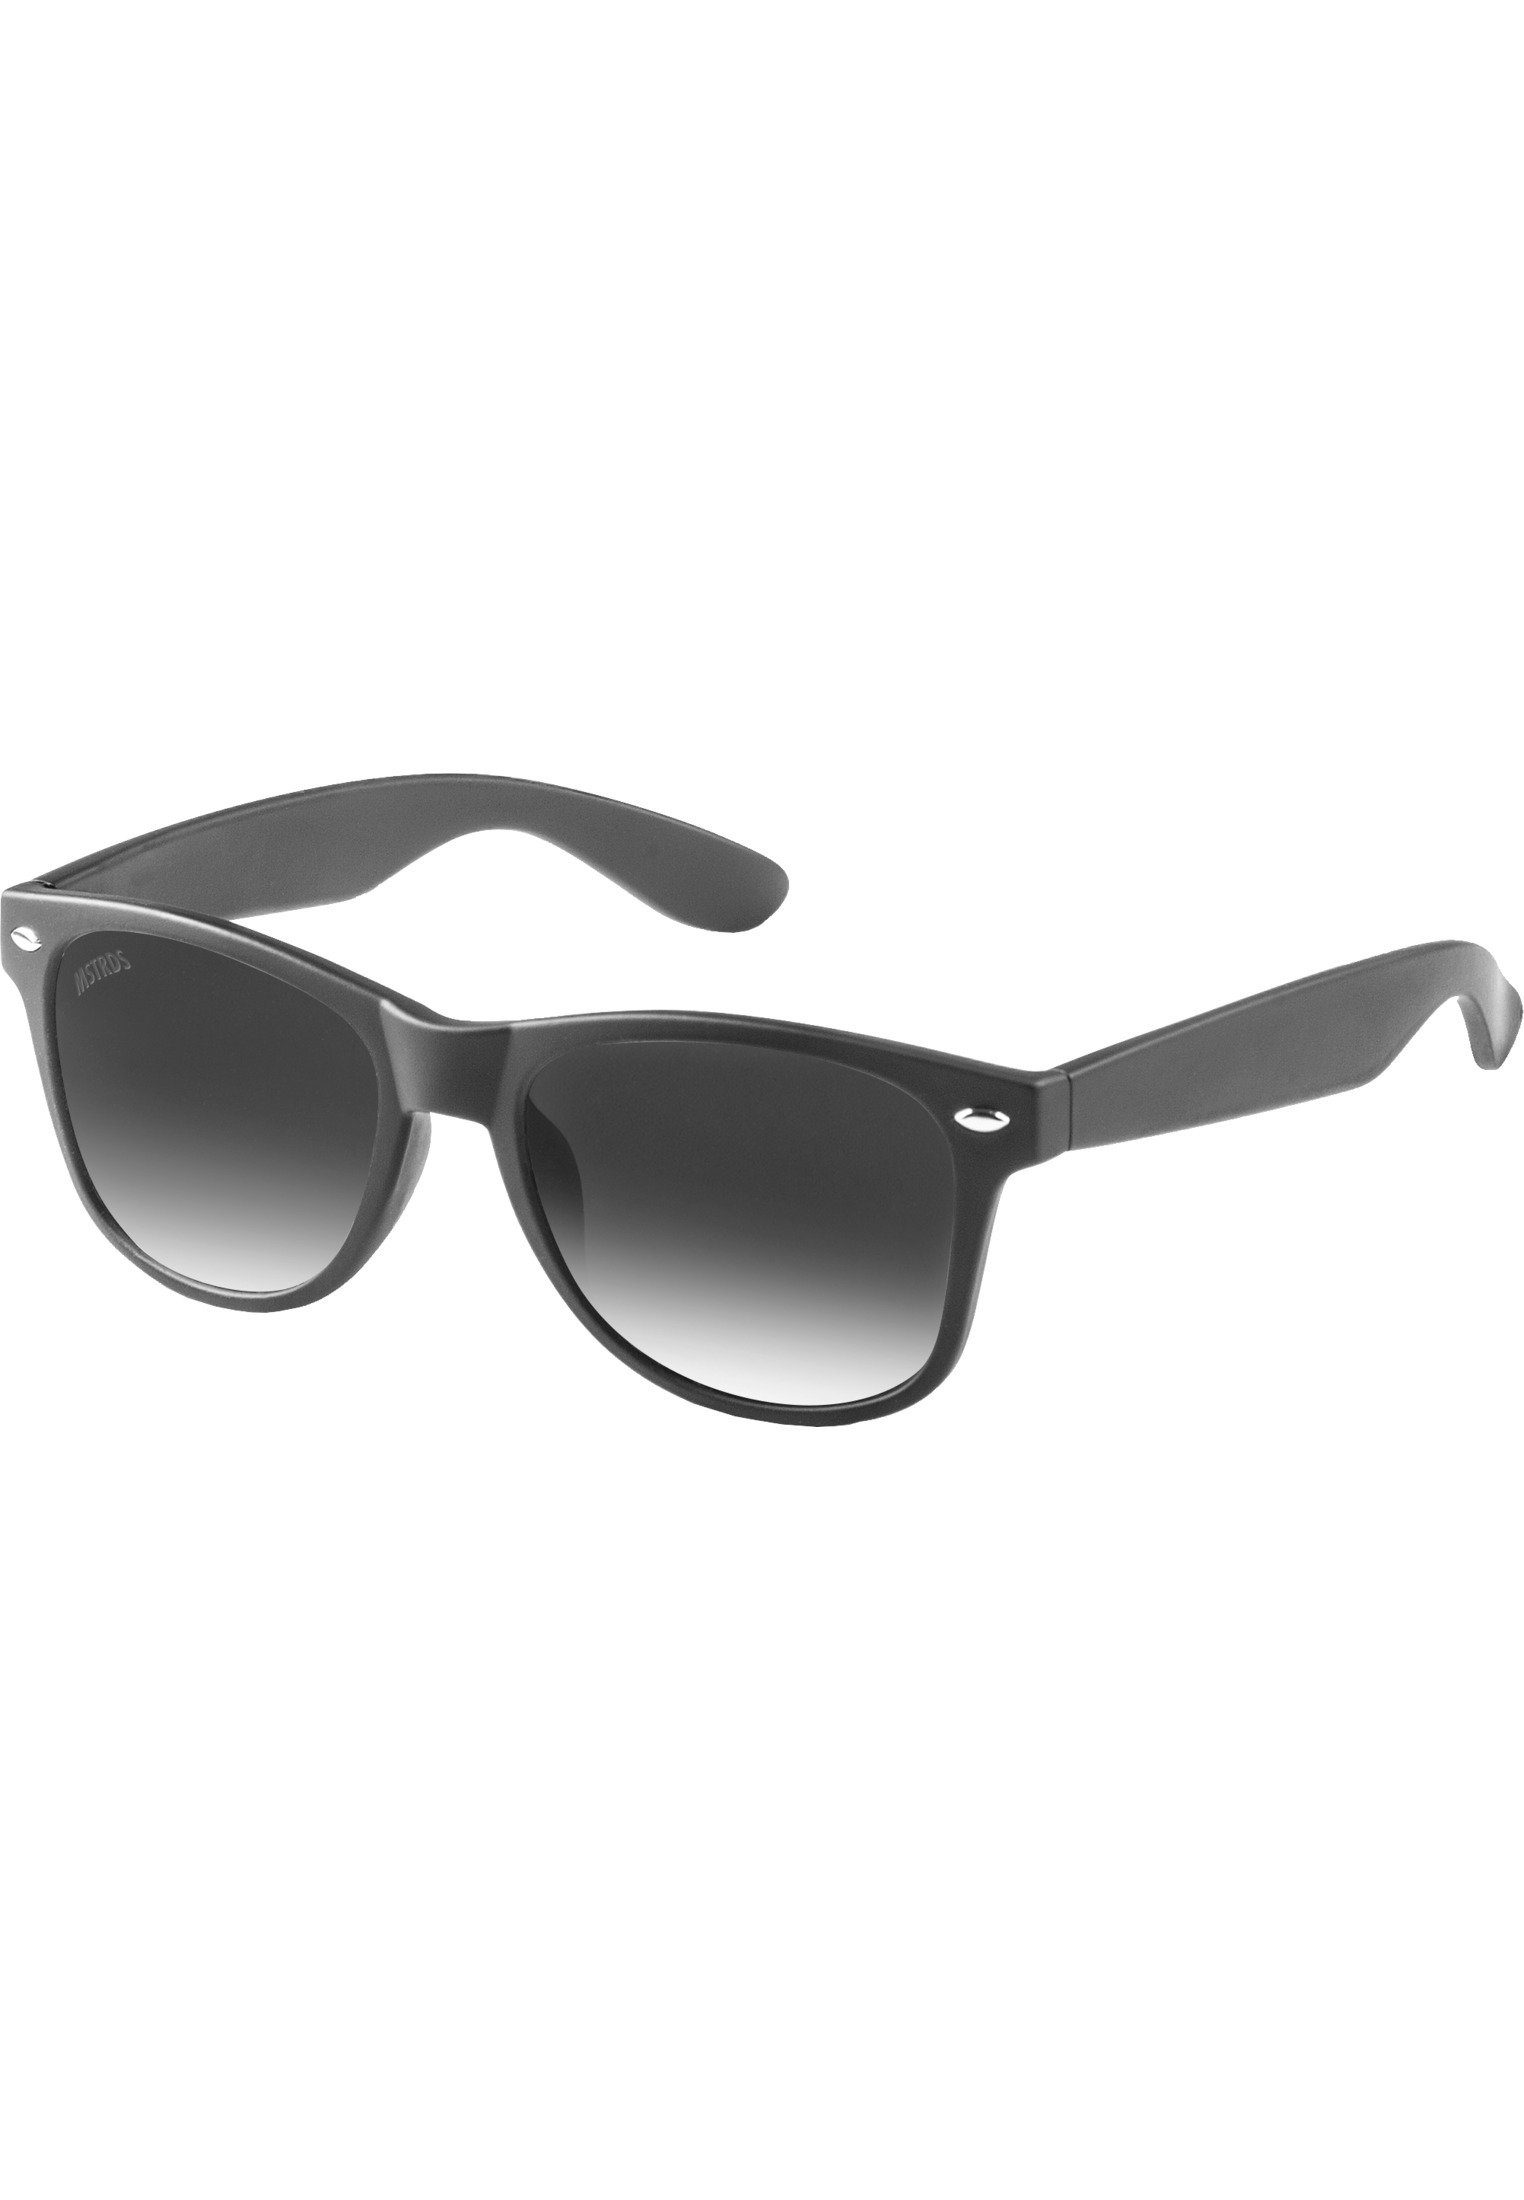 MSTRDS Youth Likoma Sunglasses blk/gry Accessoires Sonnenbrille